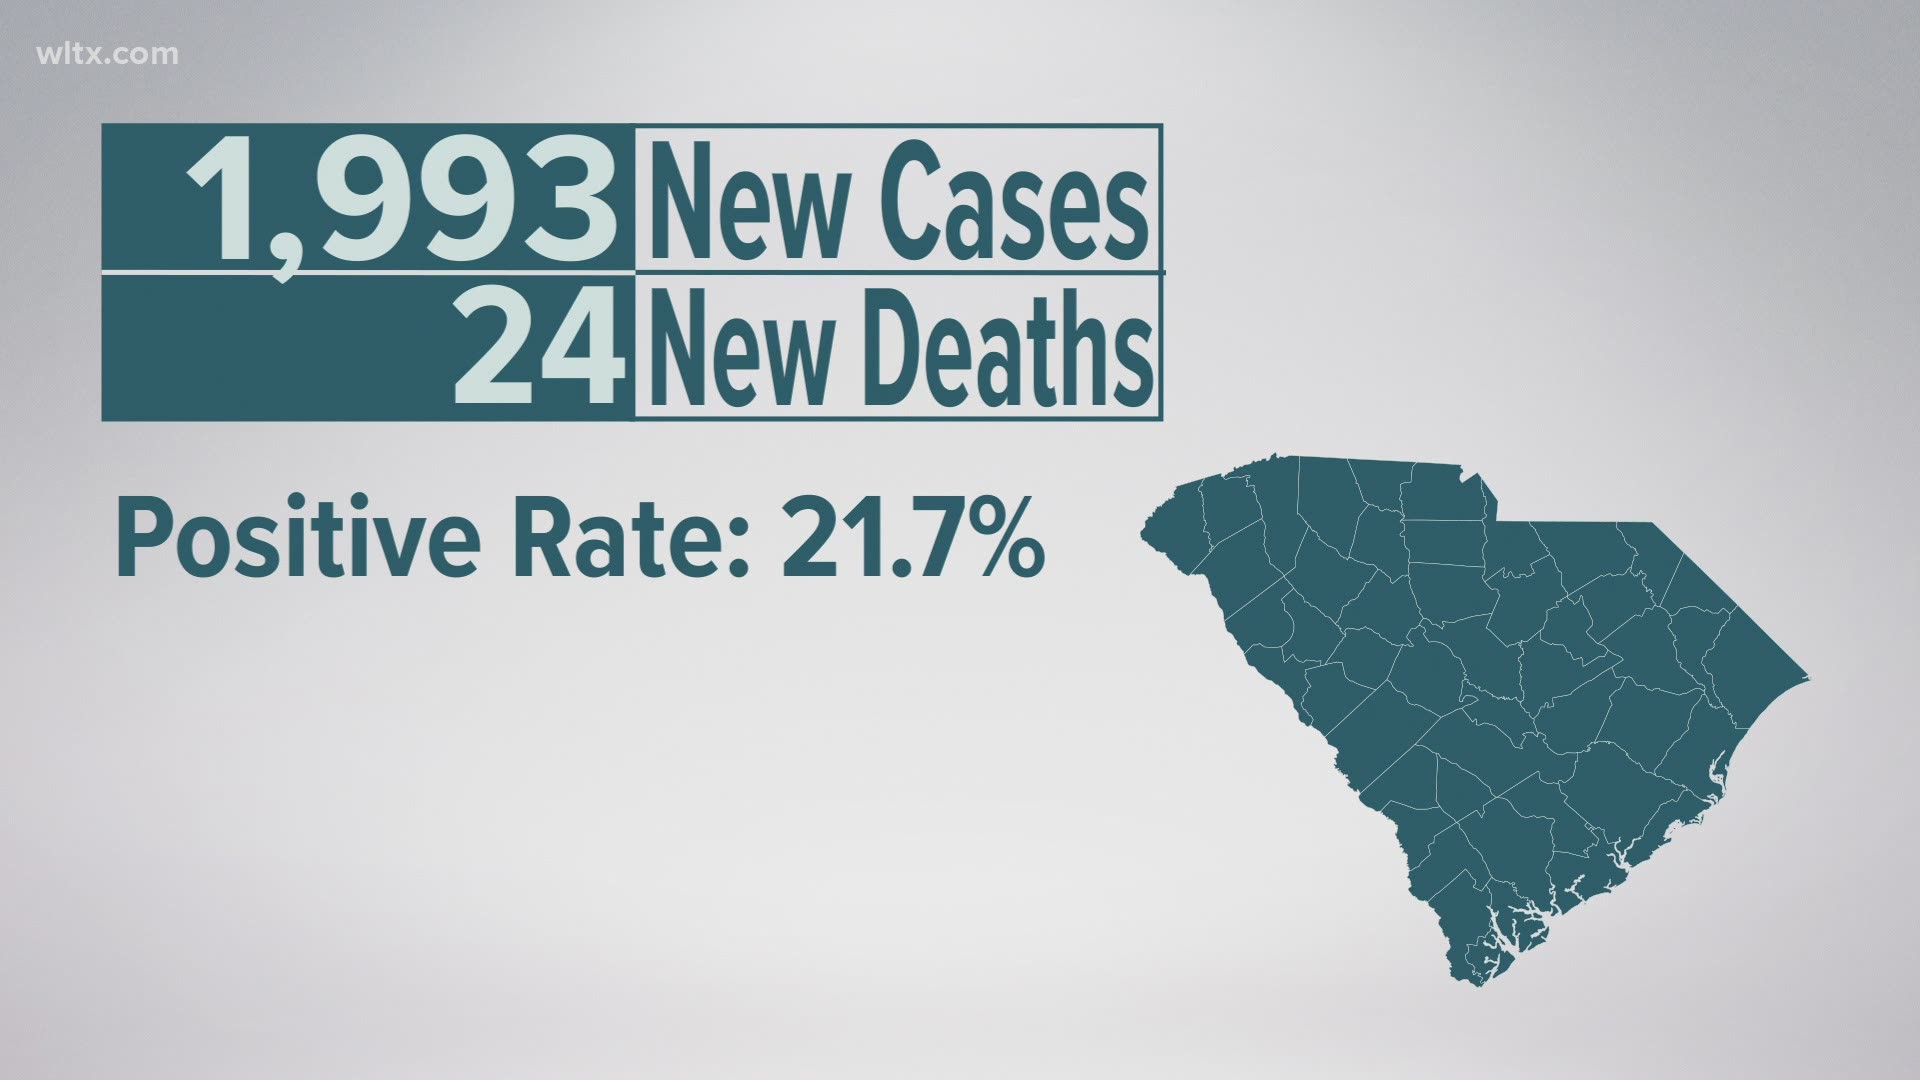 1,993 new confirmed cases of coronavirus reported by South Carolina Department of Health and Environmental Control; 2,173 hospitalized with the virus